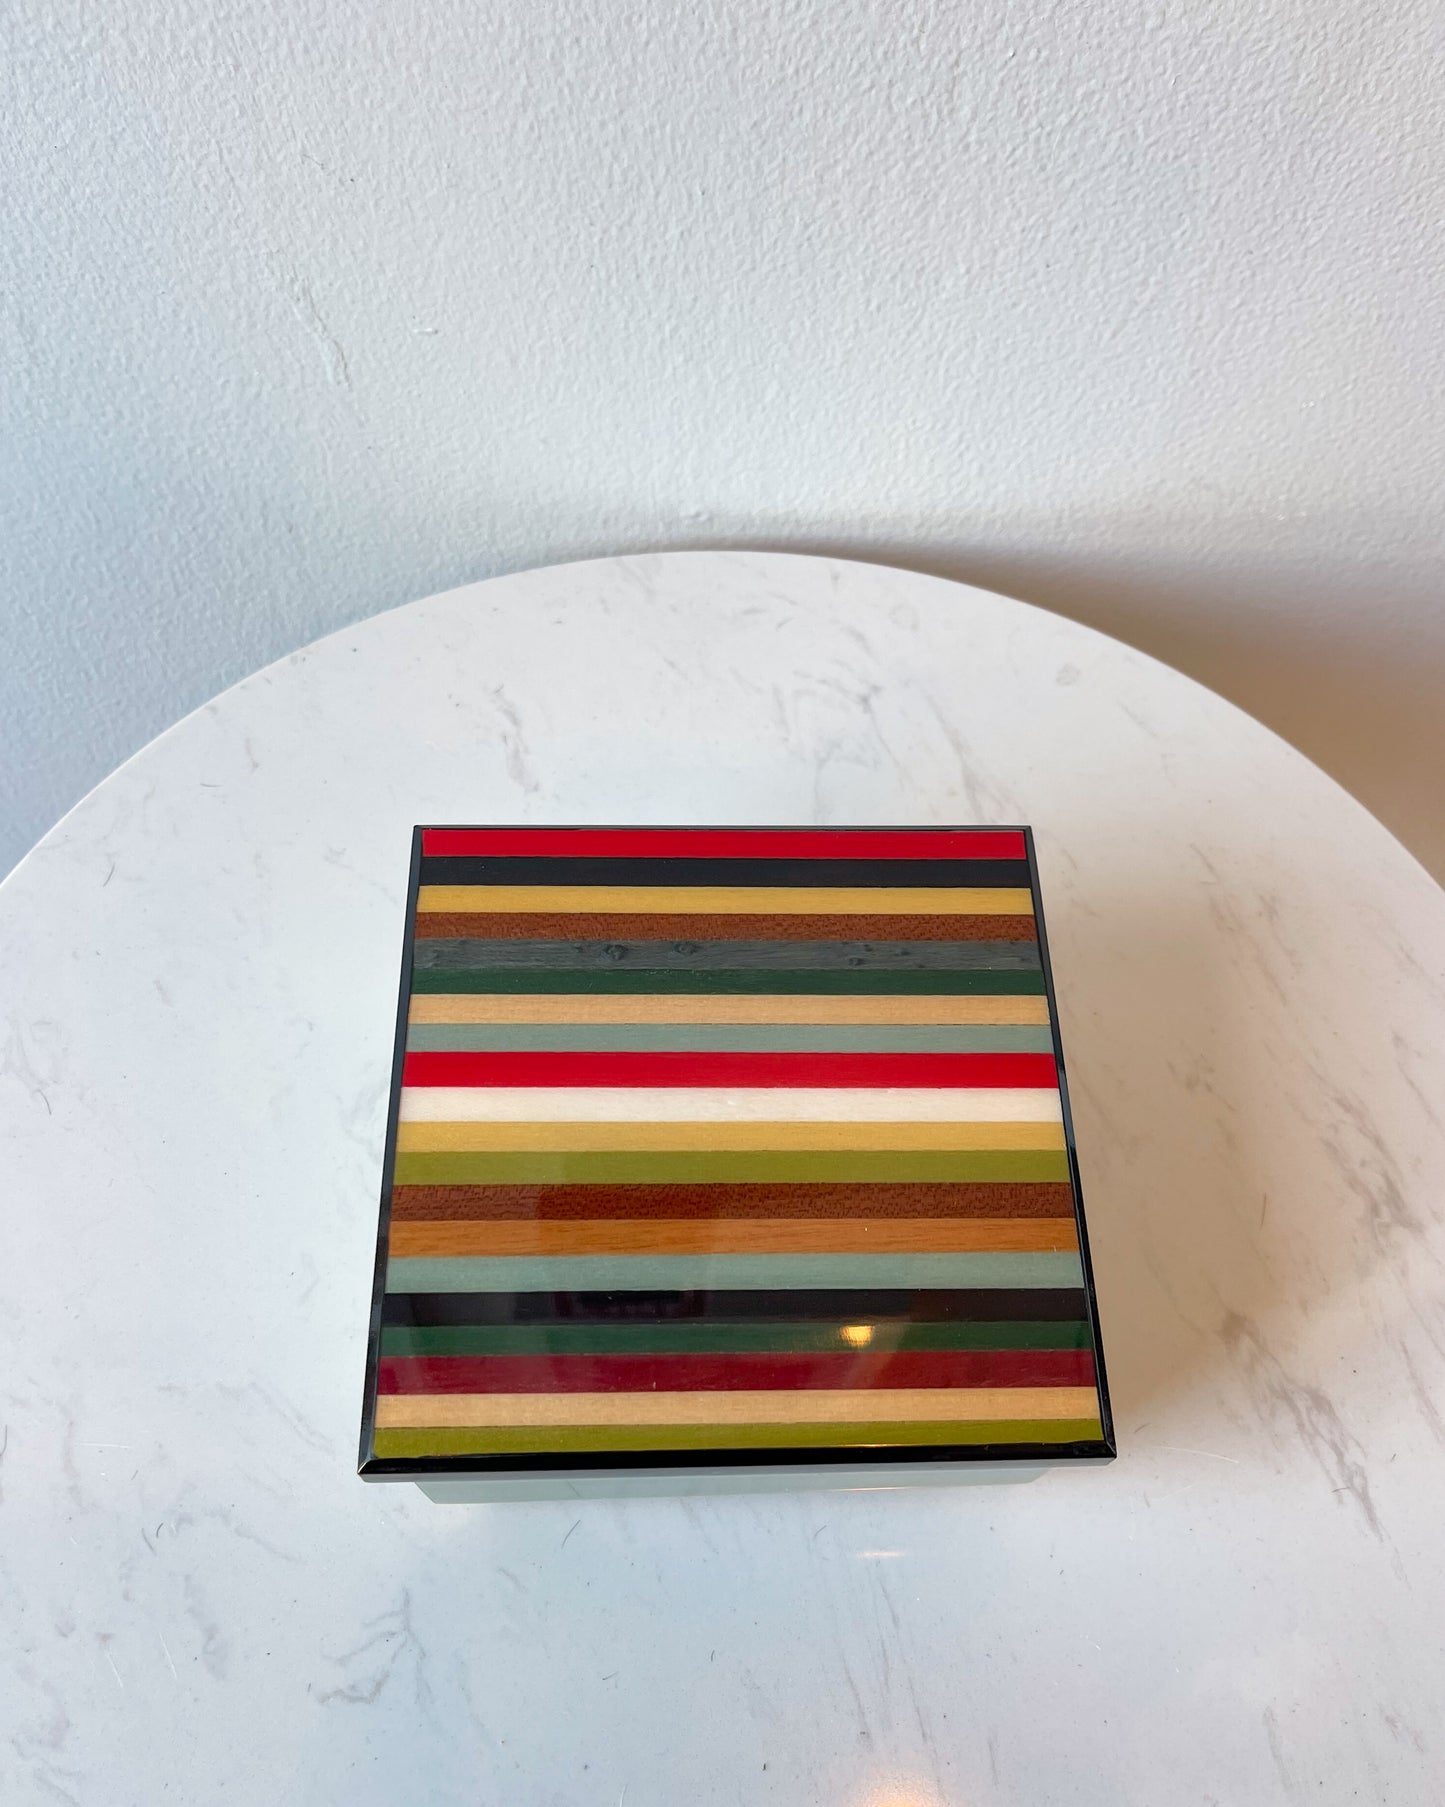 Stripe Wooden Inlaid Music Box - Made in Sorrento, Italy